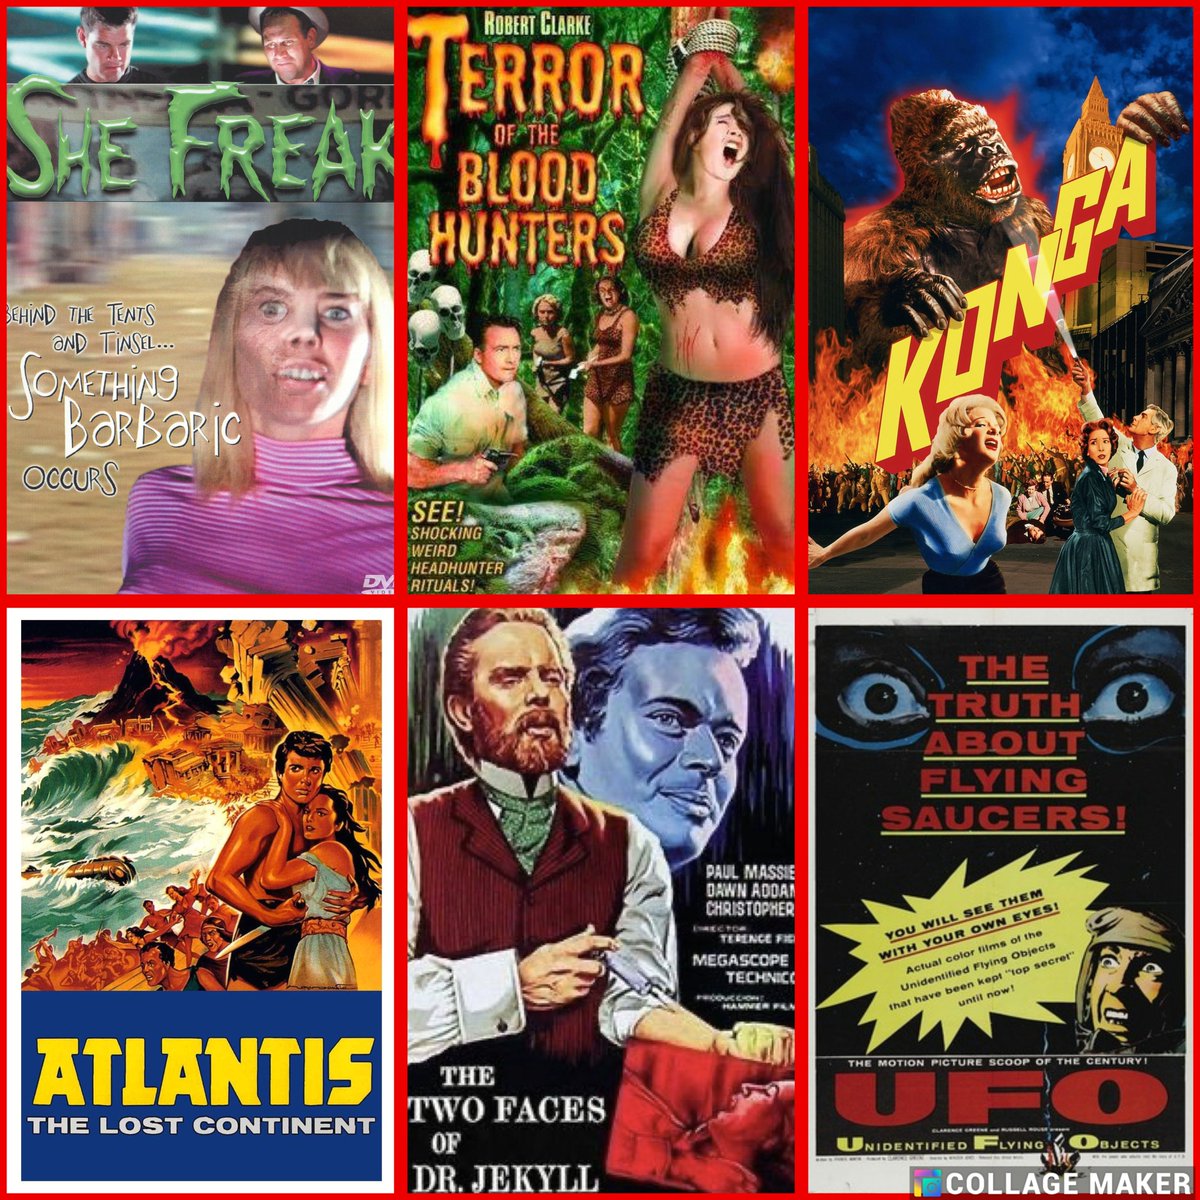 🩸Films Released On May 3rd🩸
part 1

*The True Story of Flying Saucers 1956
*House of Fright 1961 
*Atlantis, the Lost Continent 1961
*Konga 1961
*Terror of the Bloodhunters 1962
*She Freak 1967